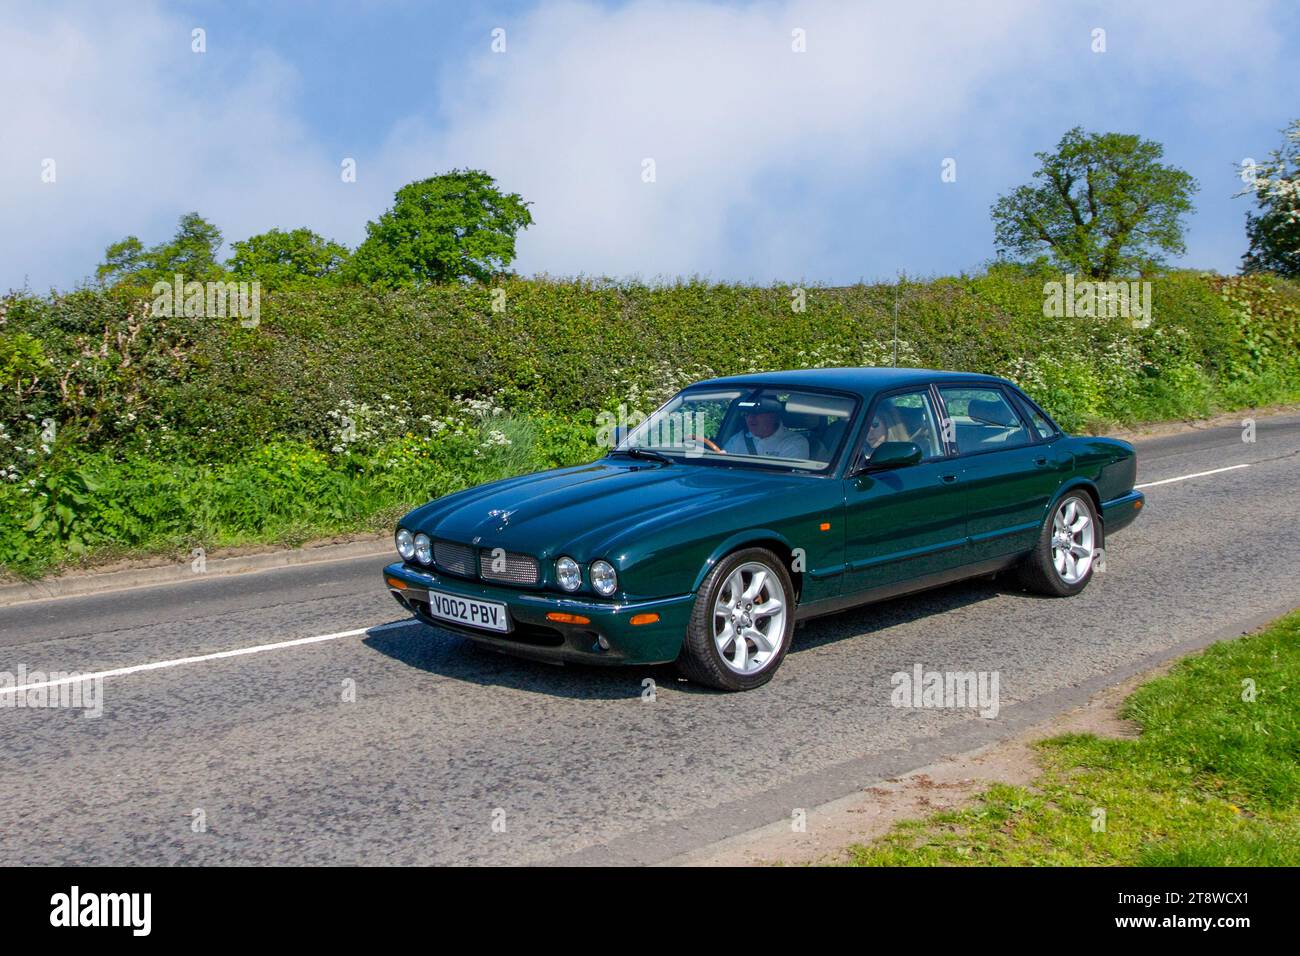 2002 Green Jaguar XJR V8 Auto, S/C SWB Auto executive saloon; Vintage, restored British classic motors, automobile collectors,  motoring enthusiasts and historic veteran cars travelling in Cheshire, UK Stock Photo